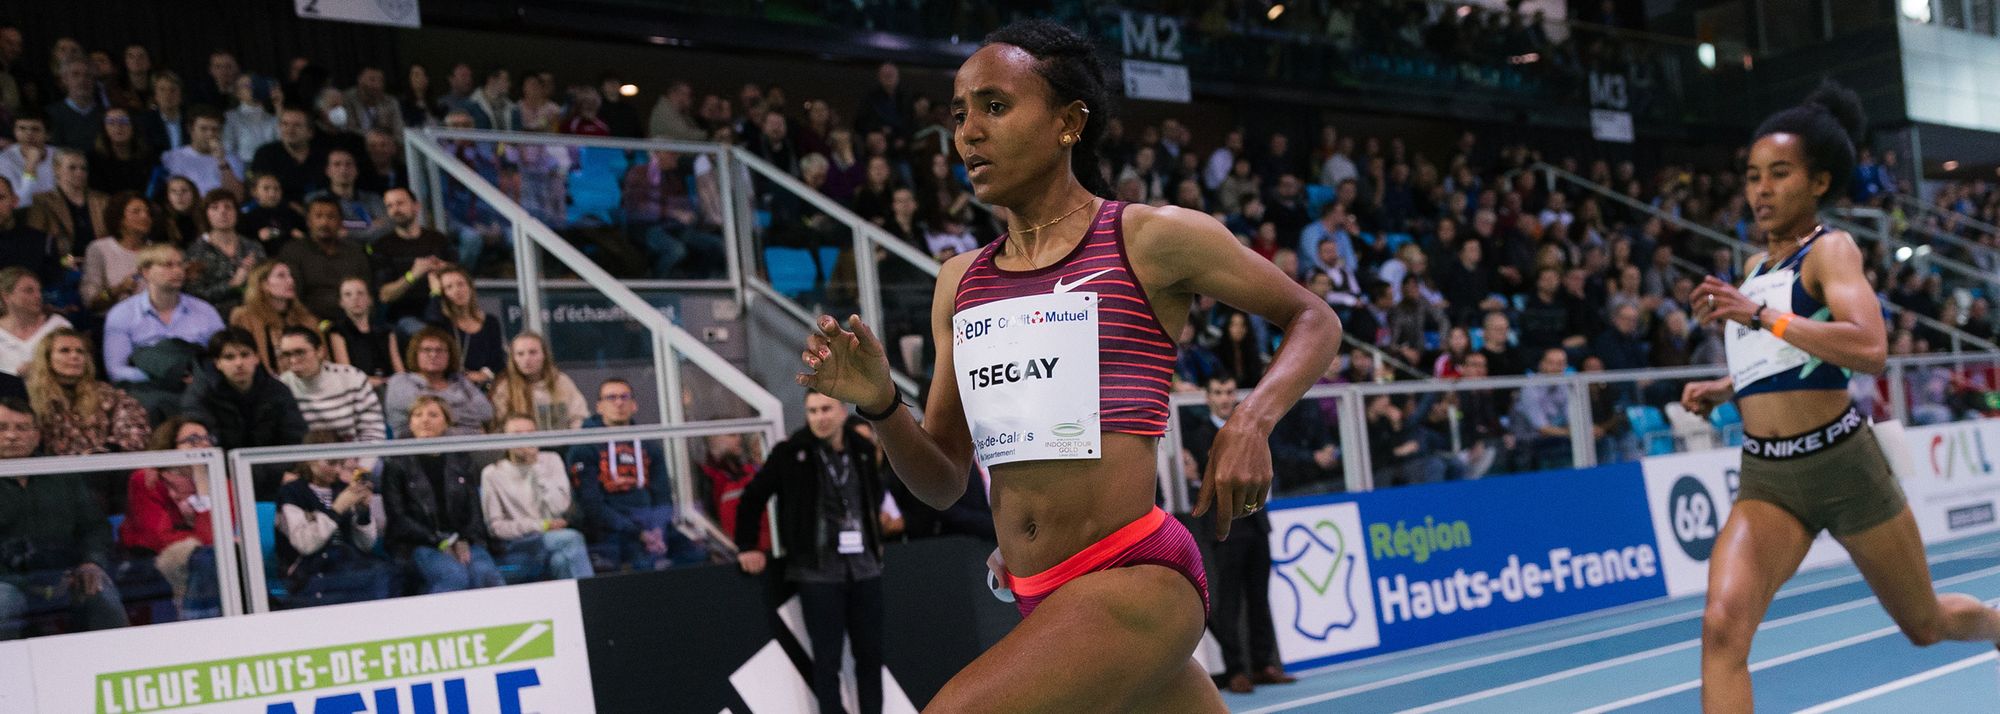 Gudaf Tsegay, Laura Muir and Keely Hodgkinson will attempt to make history, Grant Holloway and Daniel Roberts go head-to-head in the hurdles, and Dina Asher-Smith, Daryll Neita and Shericka Jackson star in a 60m showdown